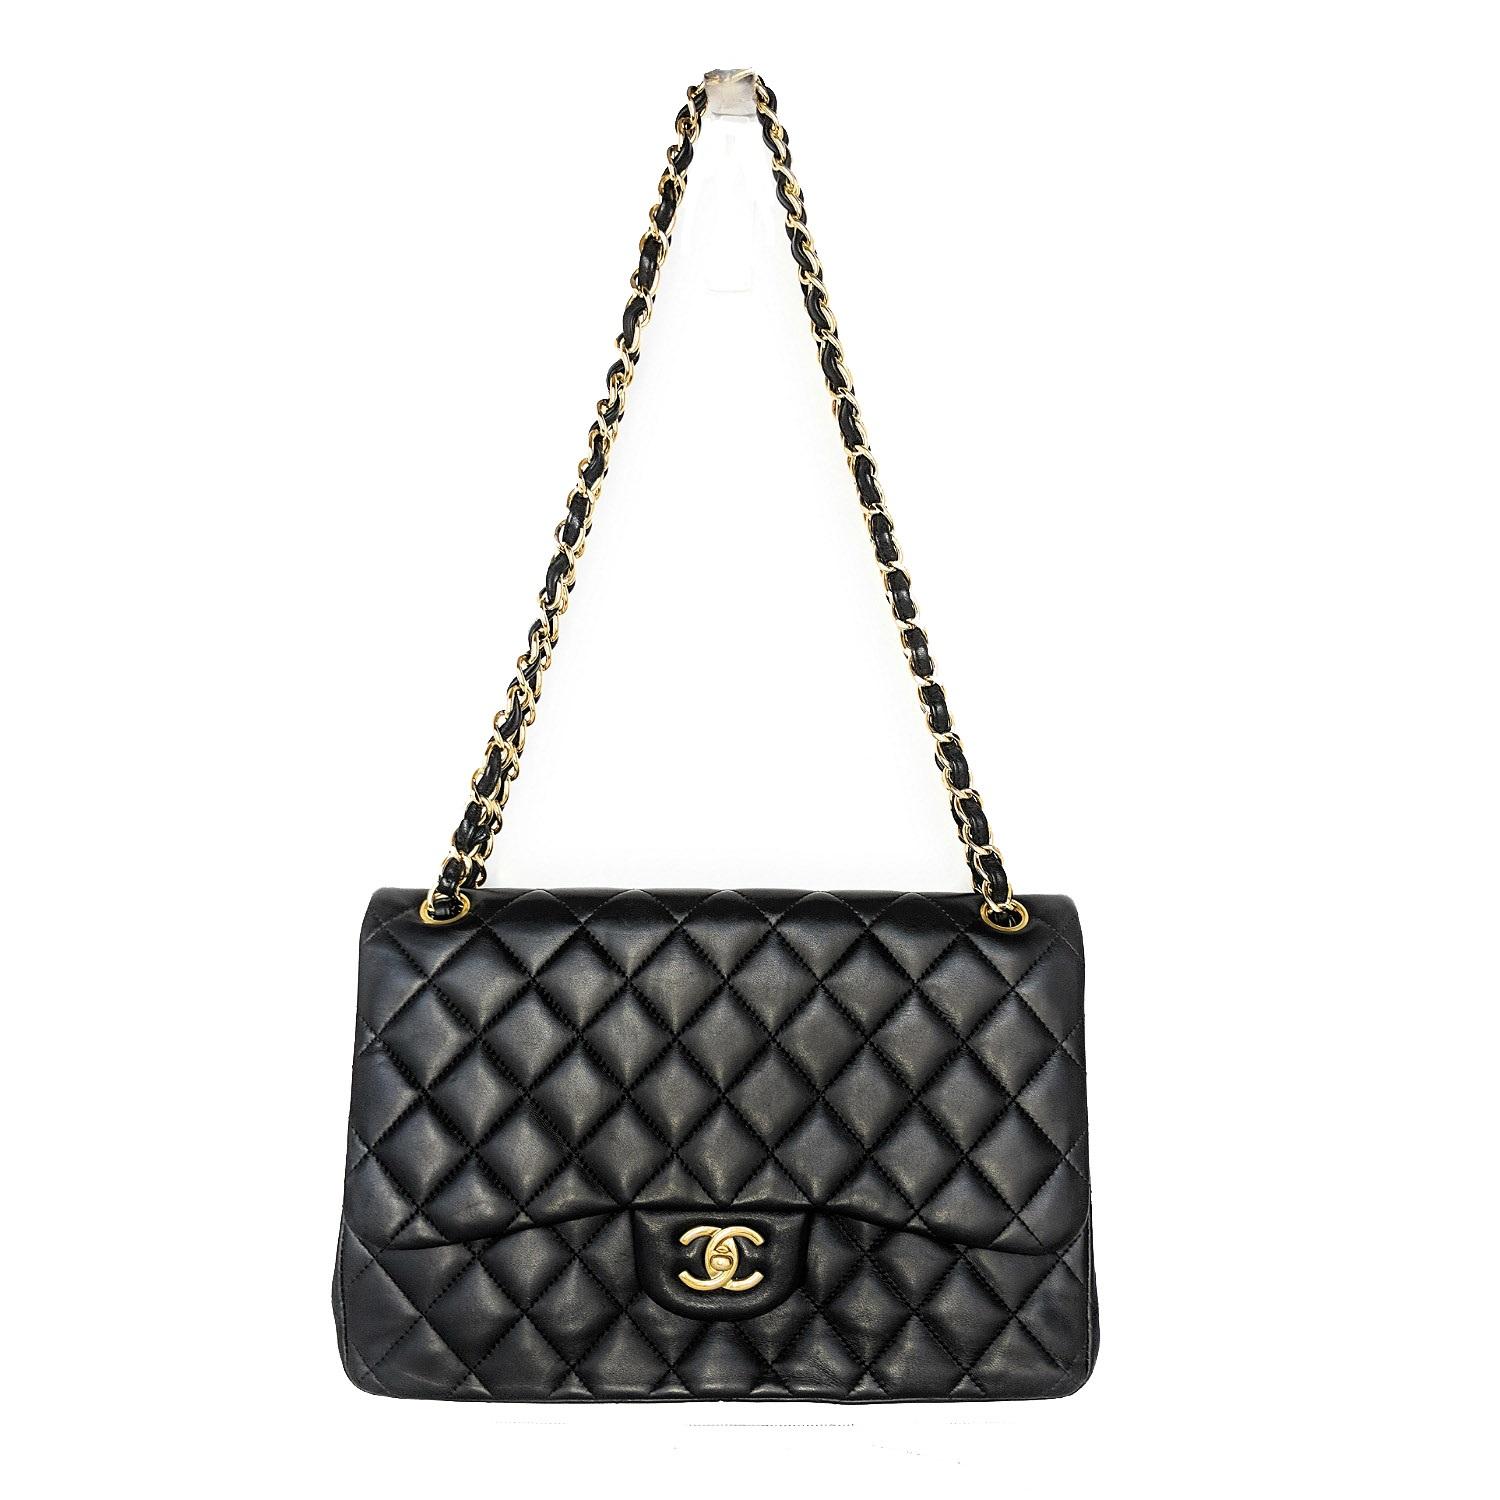 This lovely shoulder bag is crafted of soft and supple diamond-quilted lambskin leather in black. The bag features a leather-threaded polished gold-tone chain-link shoulder strap, a rear patch pocket, and a matching gold classic CC turn-lock on the